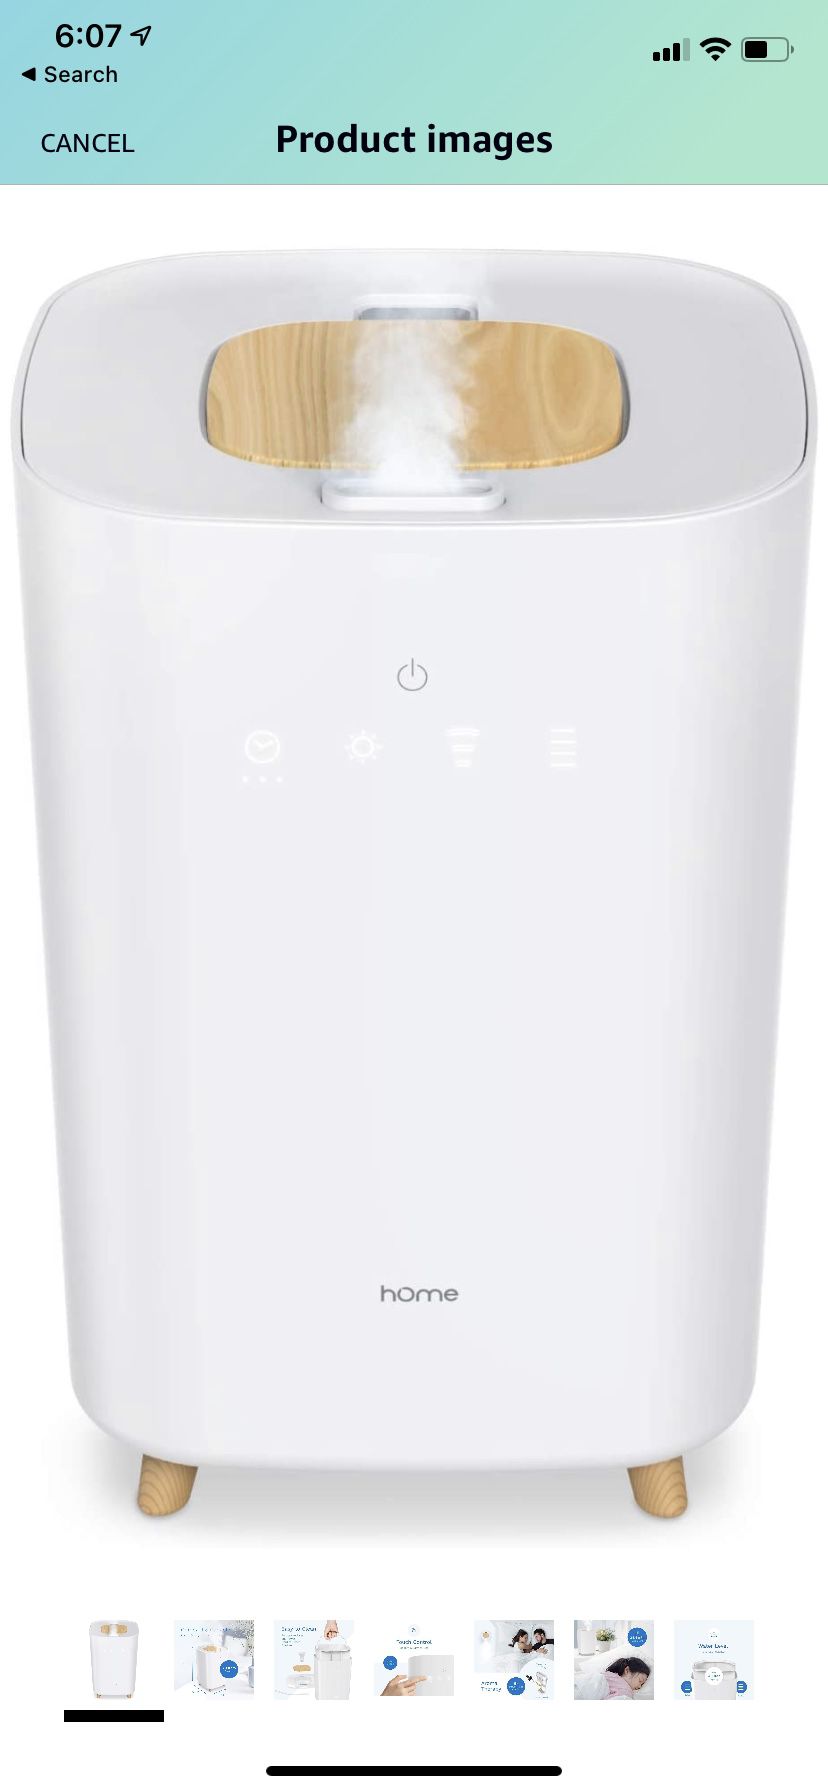 hOmeLabs Large Room Humidifier - 4L Ultrasonic Cool Mist Humidifier for Bedroom, Nursery or Office - Runs up to 40 Hours, Covers 215 Sq Ft Room with